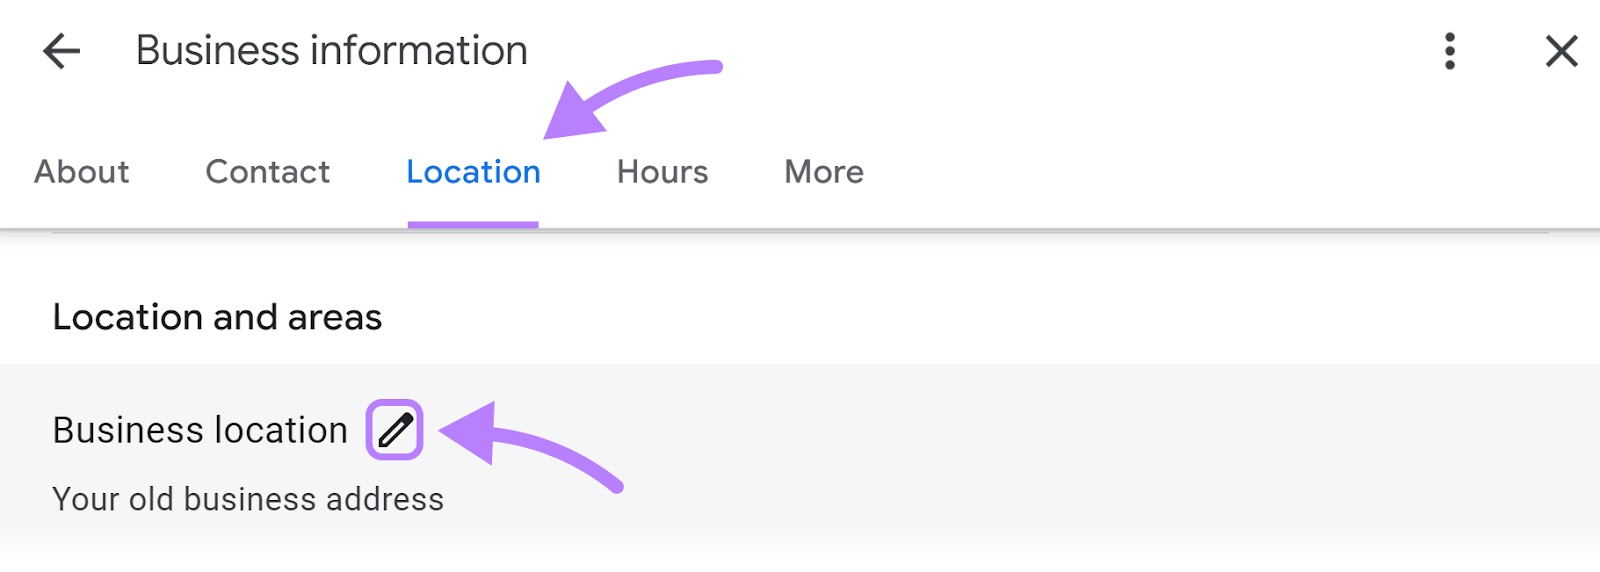 Pencil icon highlighted adjacent  to "Business location" field